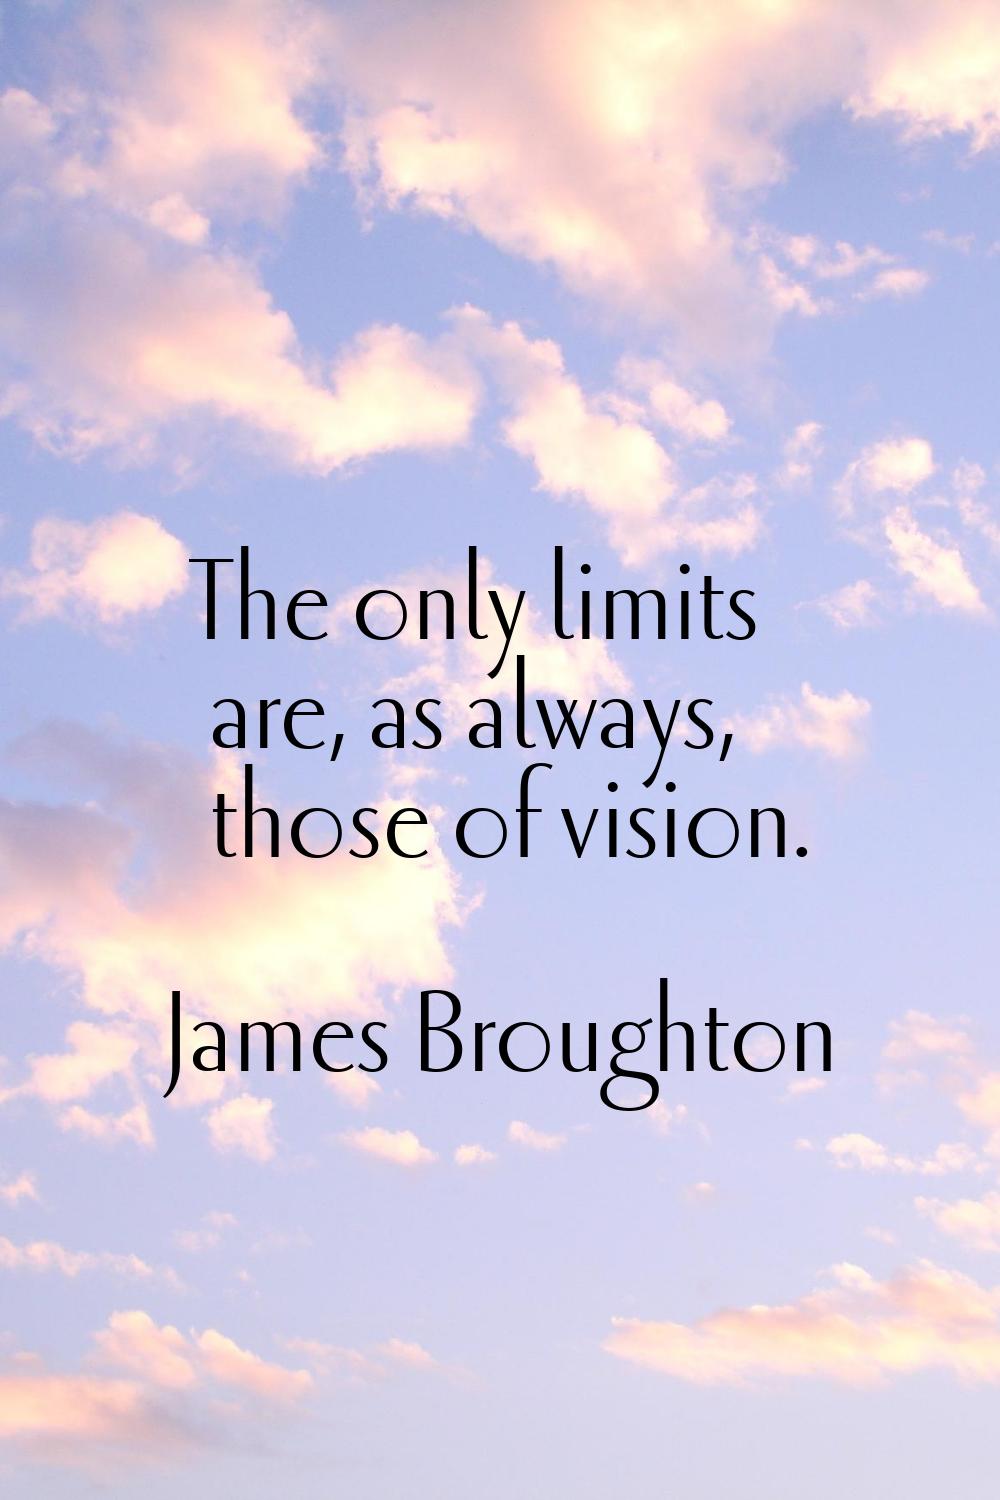 The only limits are, as always, those of vision.